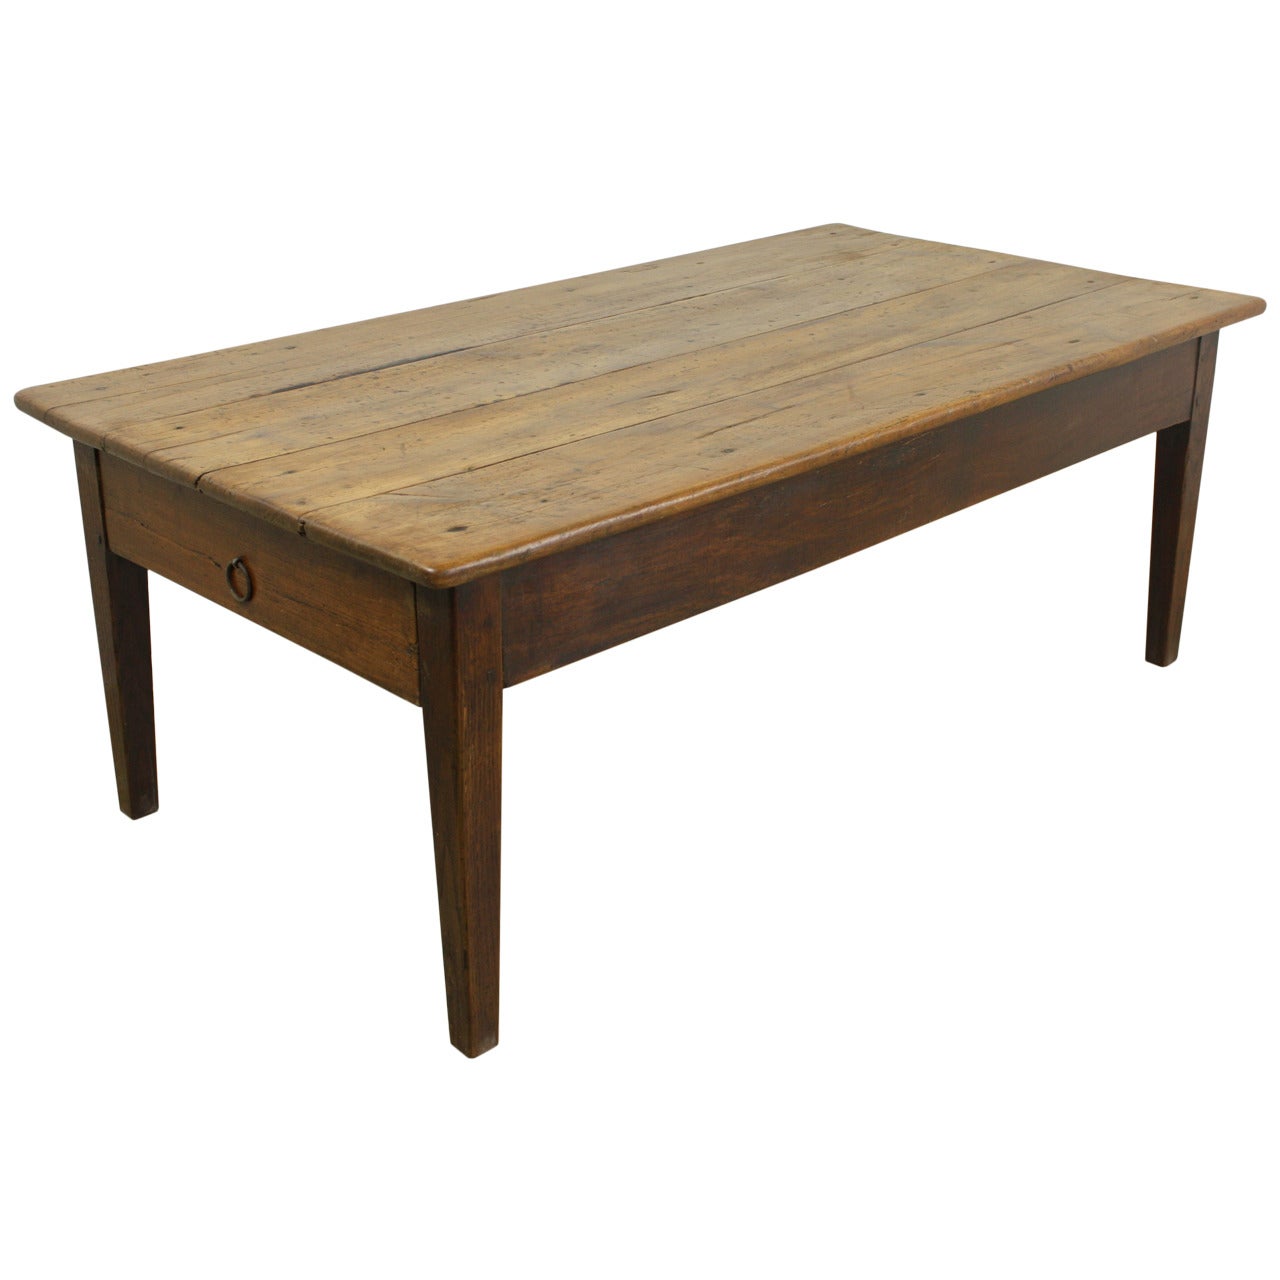 Antique French Cherry Coffee Table